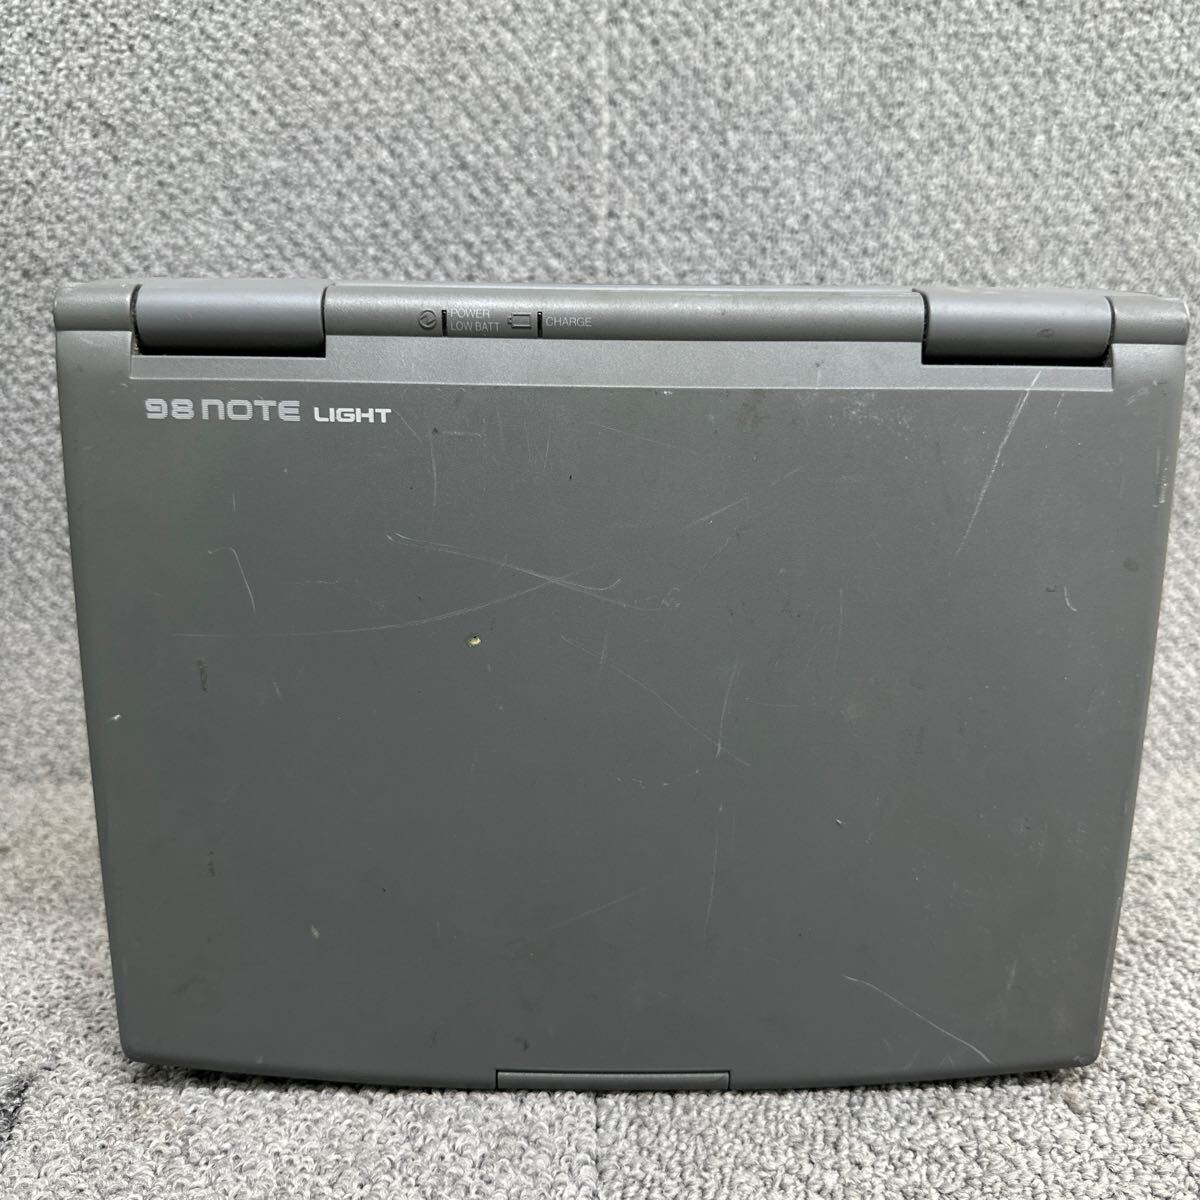 PCN98-1783 super-discount PC98 notebook NEC 98note LIGHT PC-9821Lt2/3D start-up has confirmed Junk including in a package possibility 